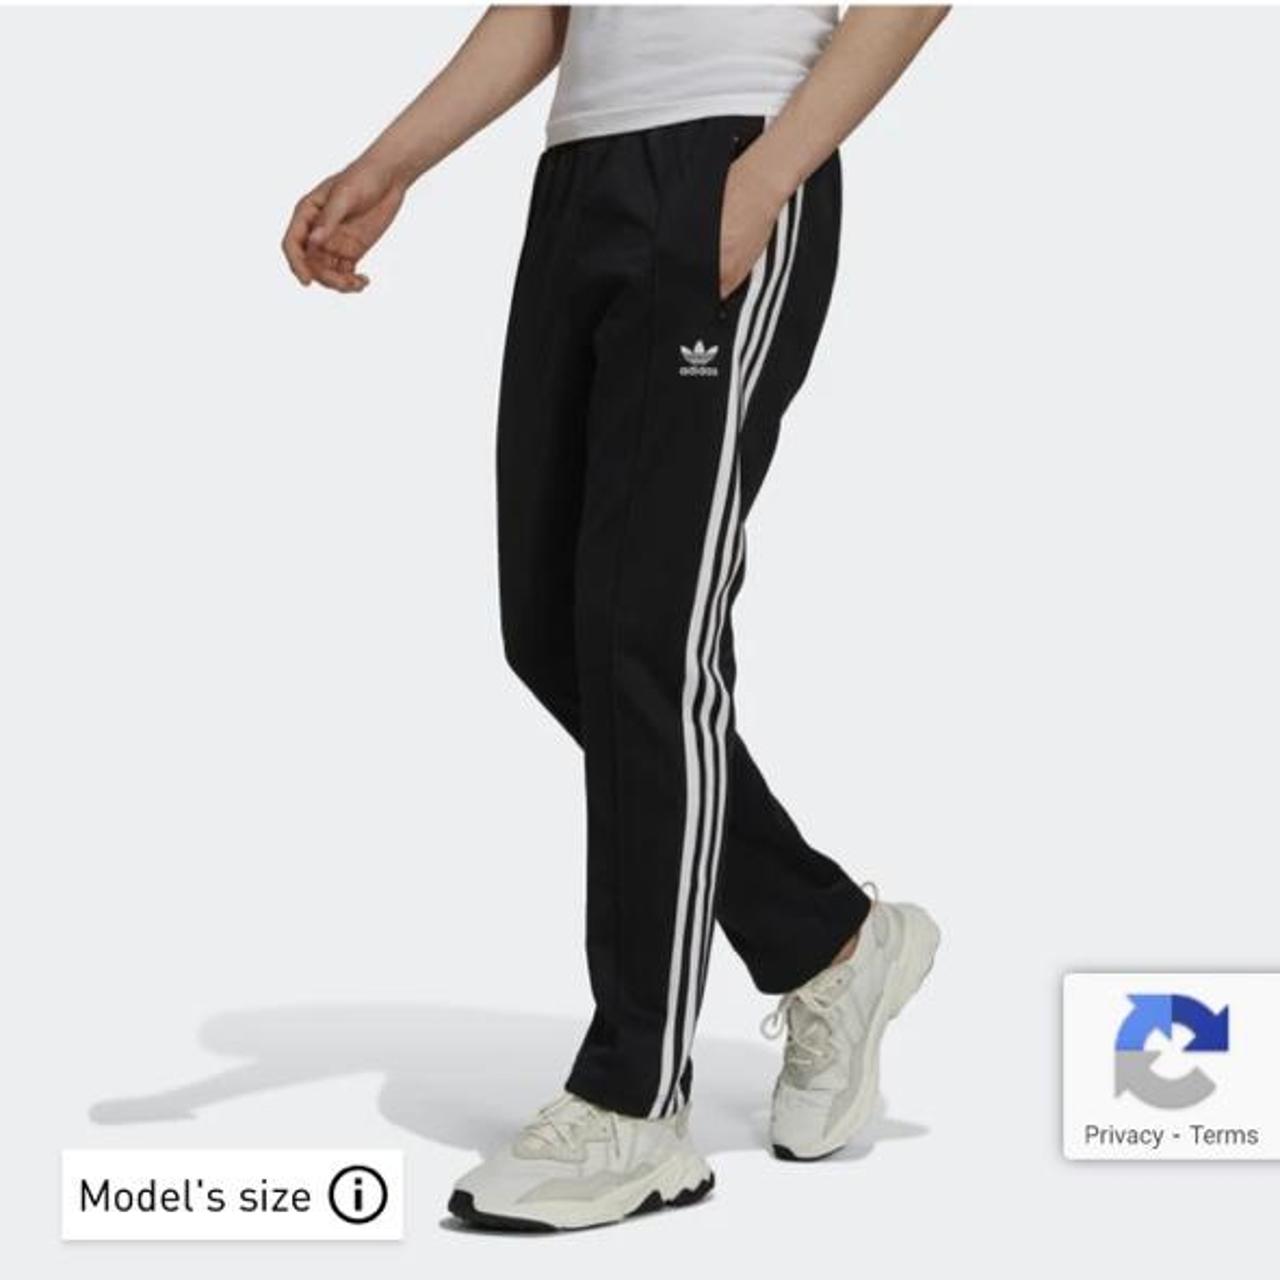 Adidas Men's Black and White Joggers-tracksuits (2)